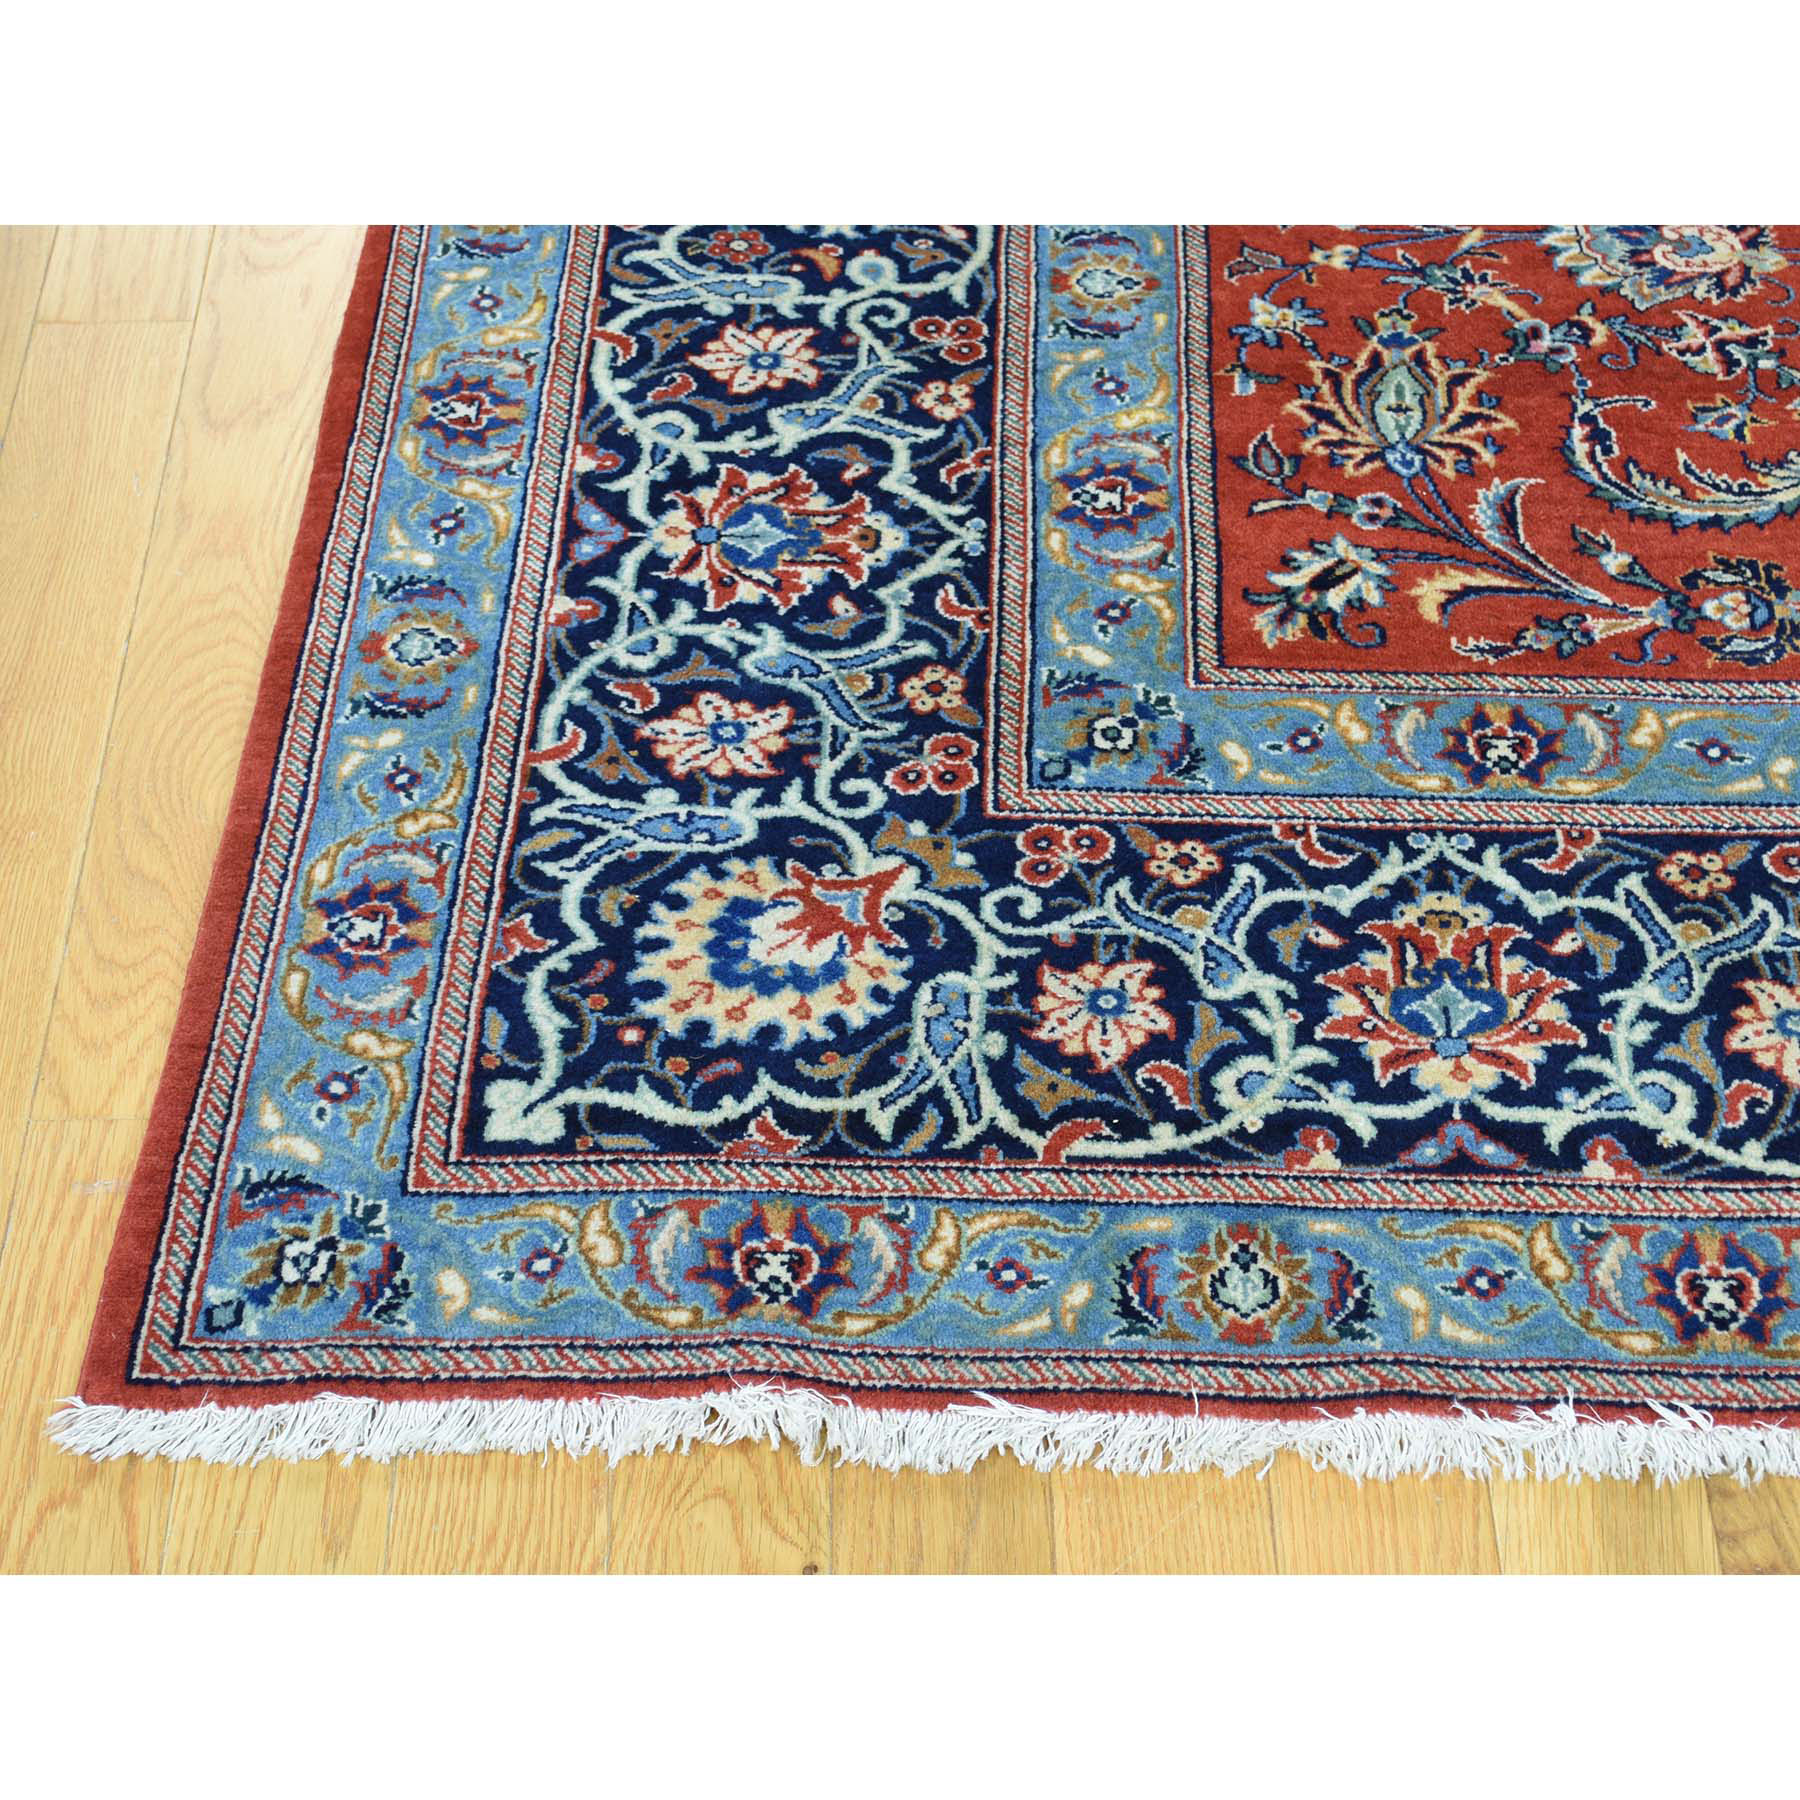 7-10 x11- Hand-Knotted Antique Persian Kashan Full Pile Oriental Rug 